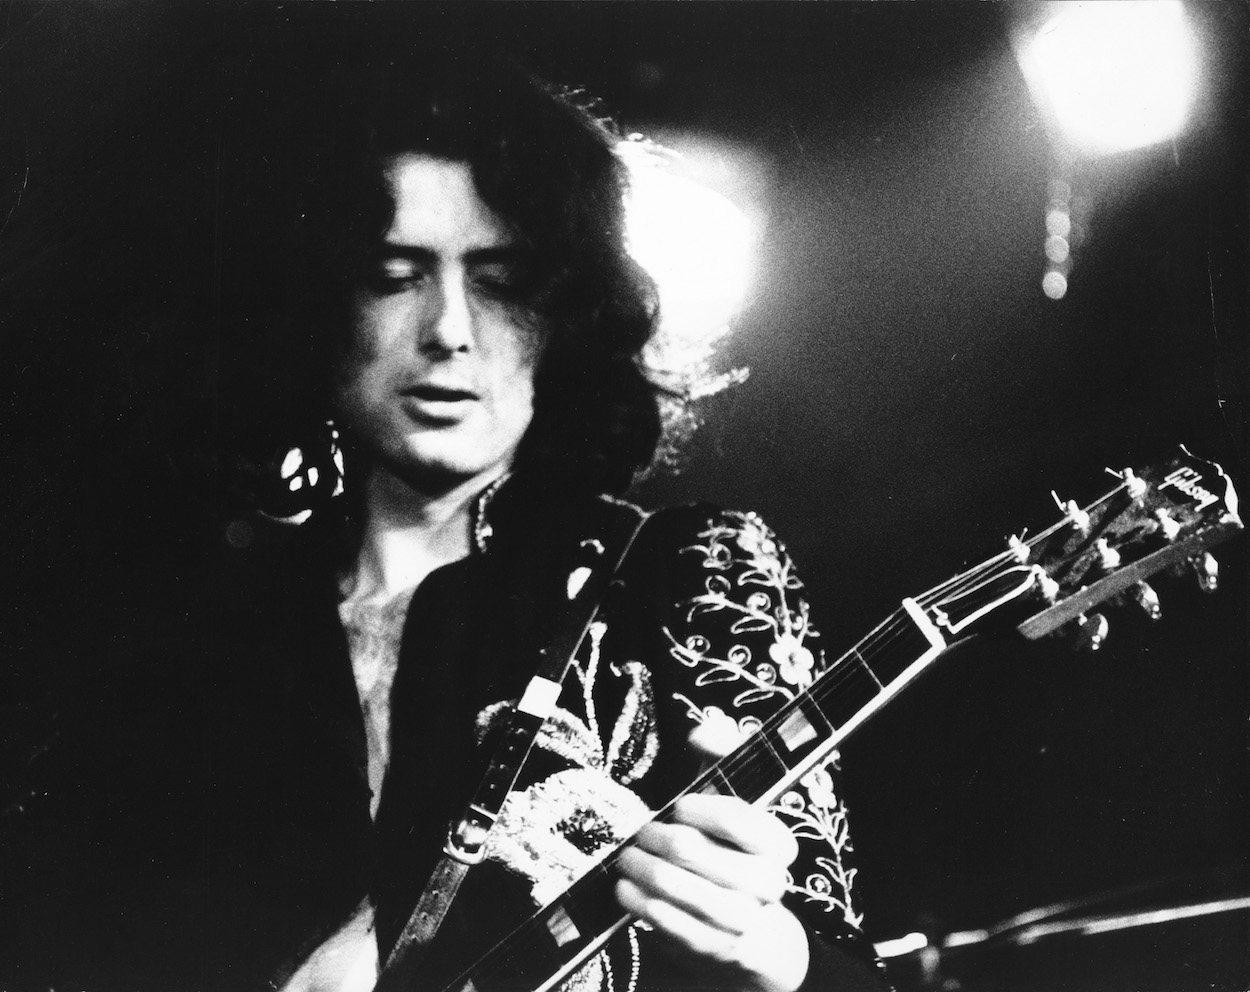 Led Zeppelin founder Jimmy Page plays his Gibson guitar during a 1972 concert.